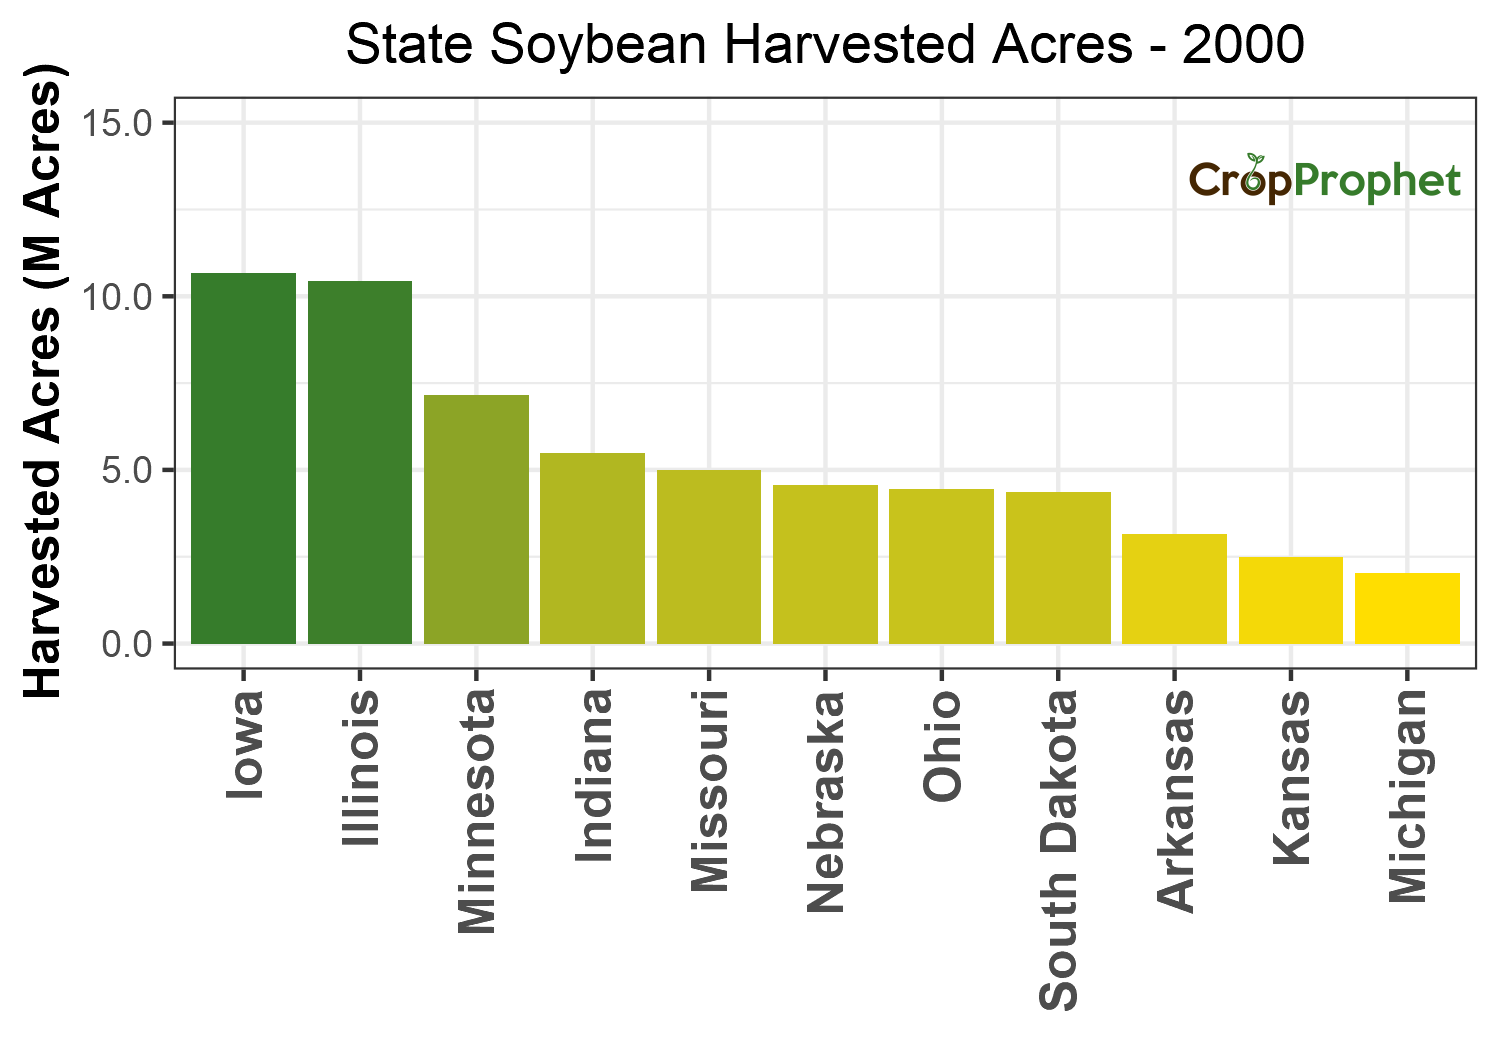 Soybean Harvested Acres by State - 2000 Rankings